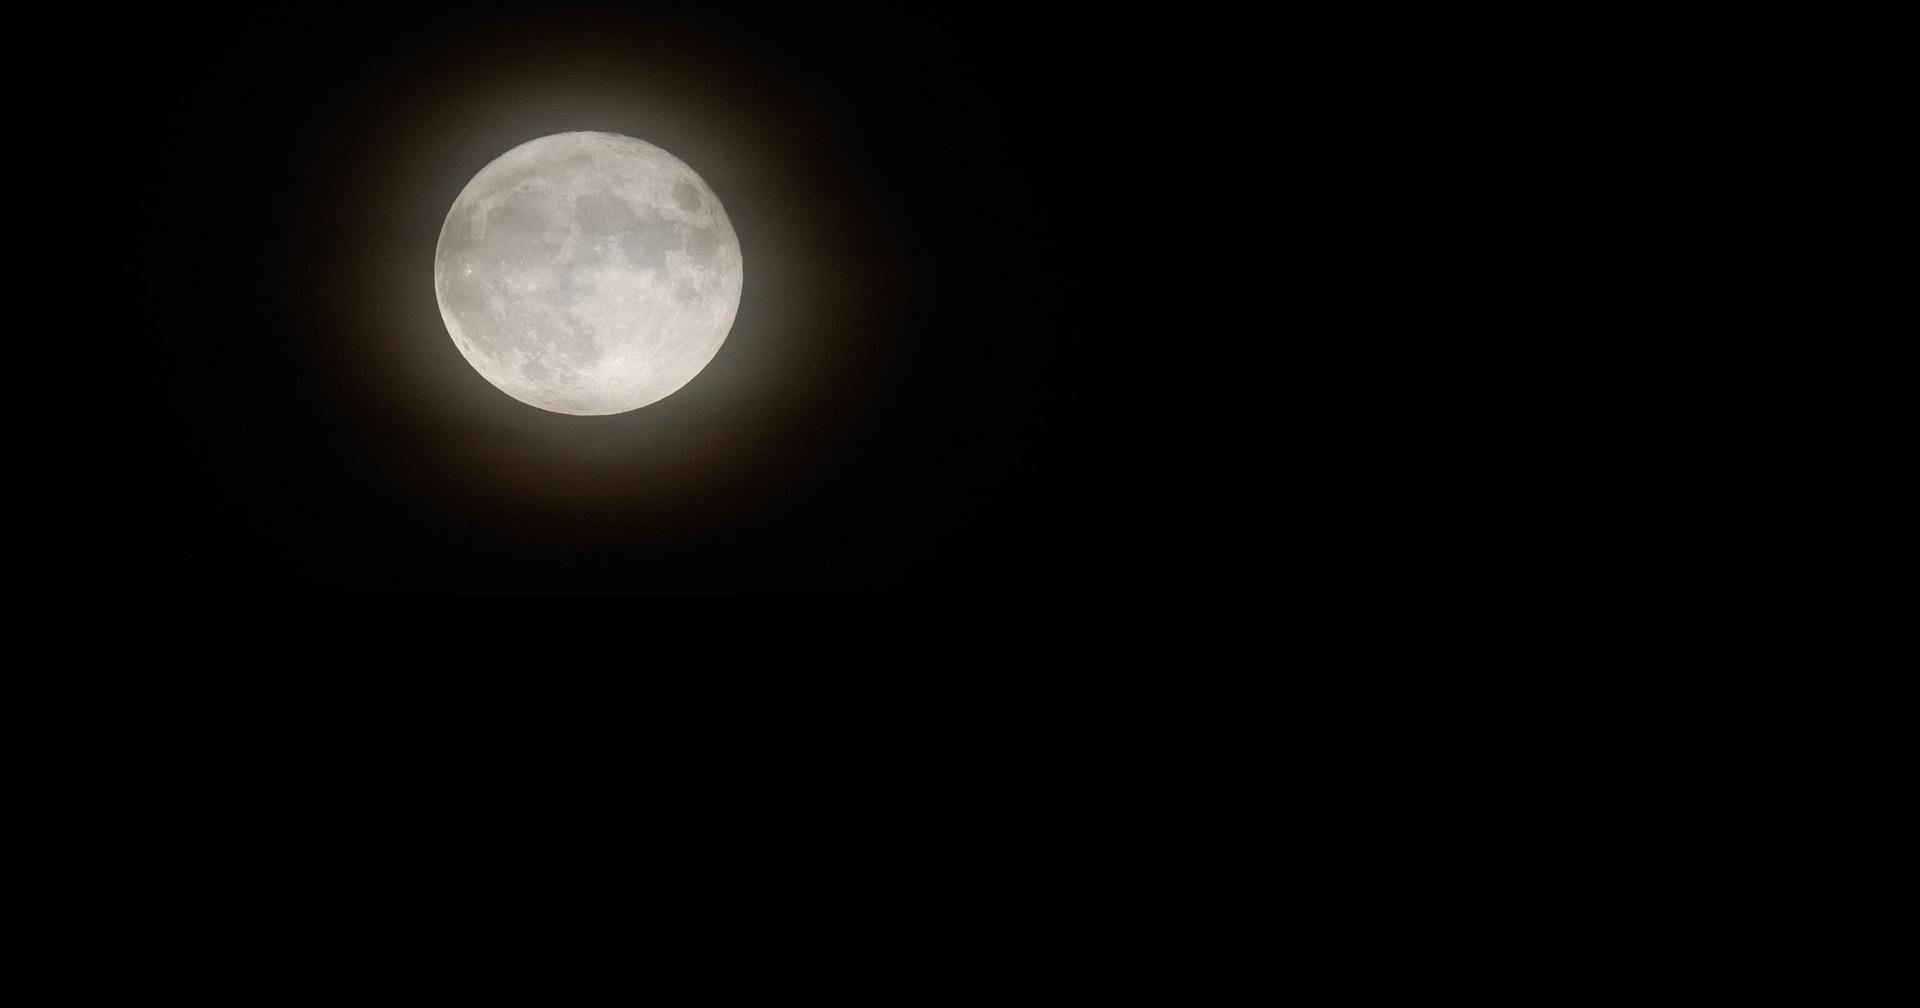 December's full moon: When to see the Christmas moon - Good Morning America